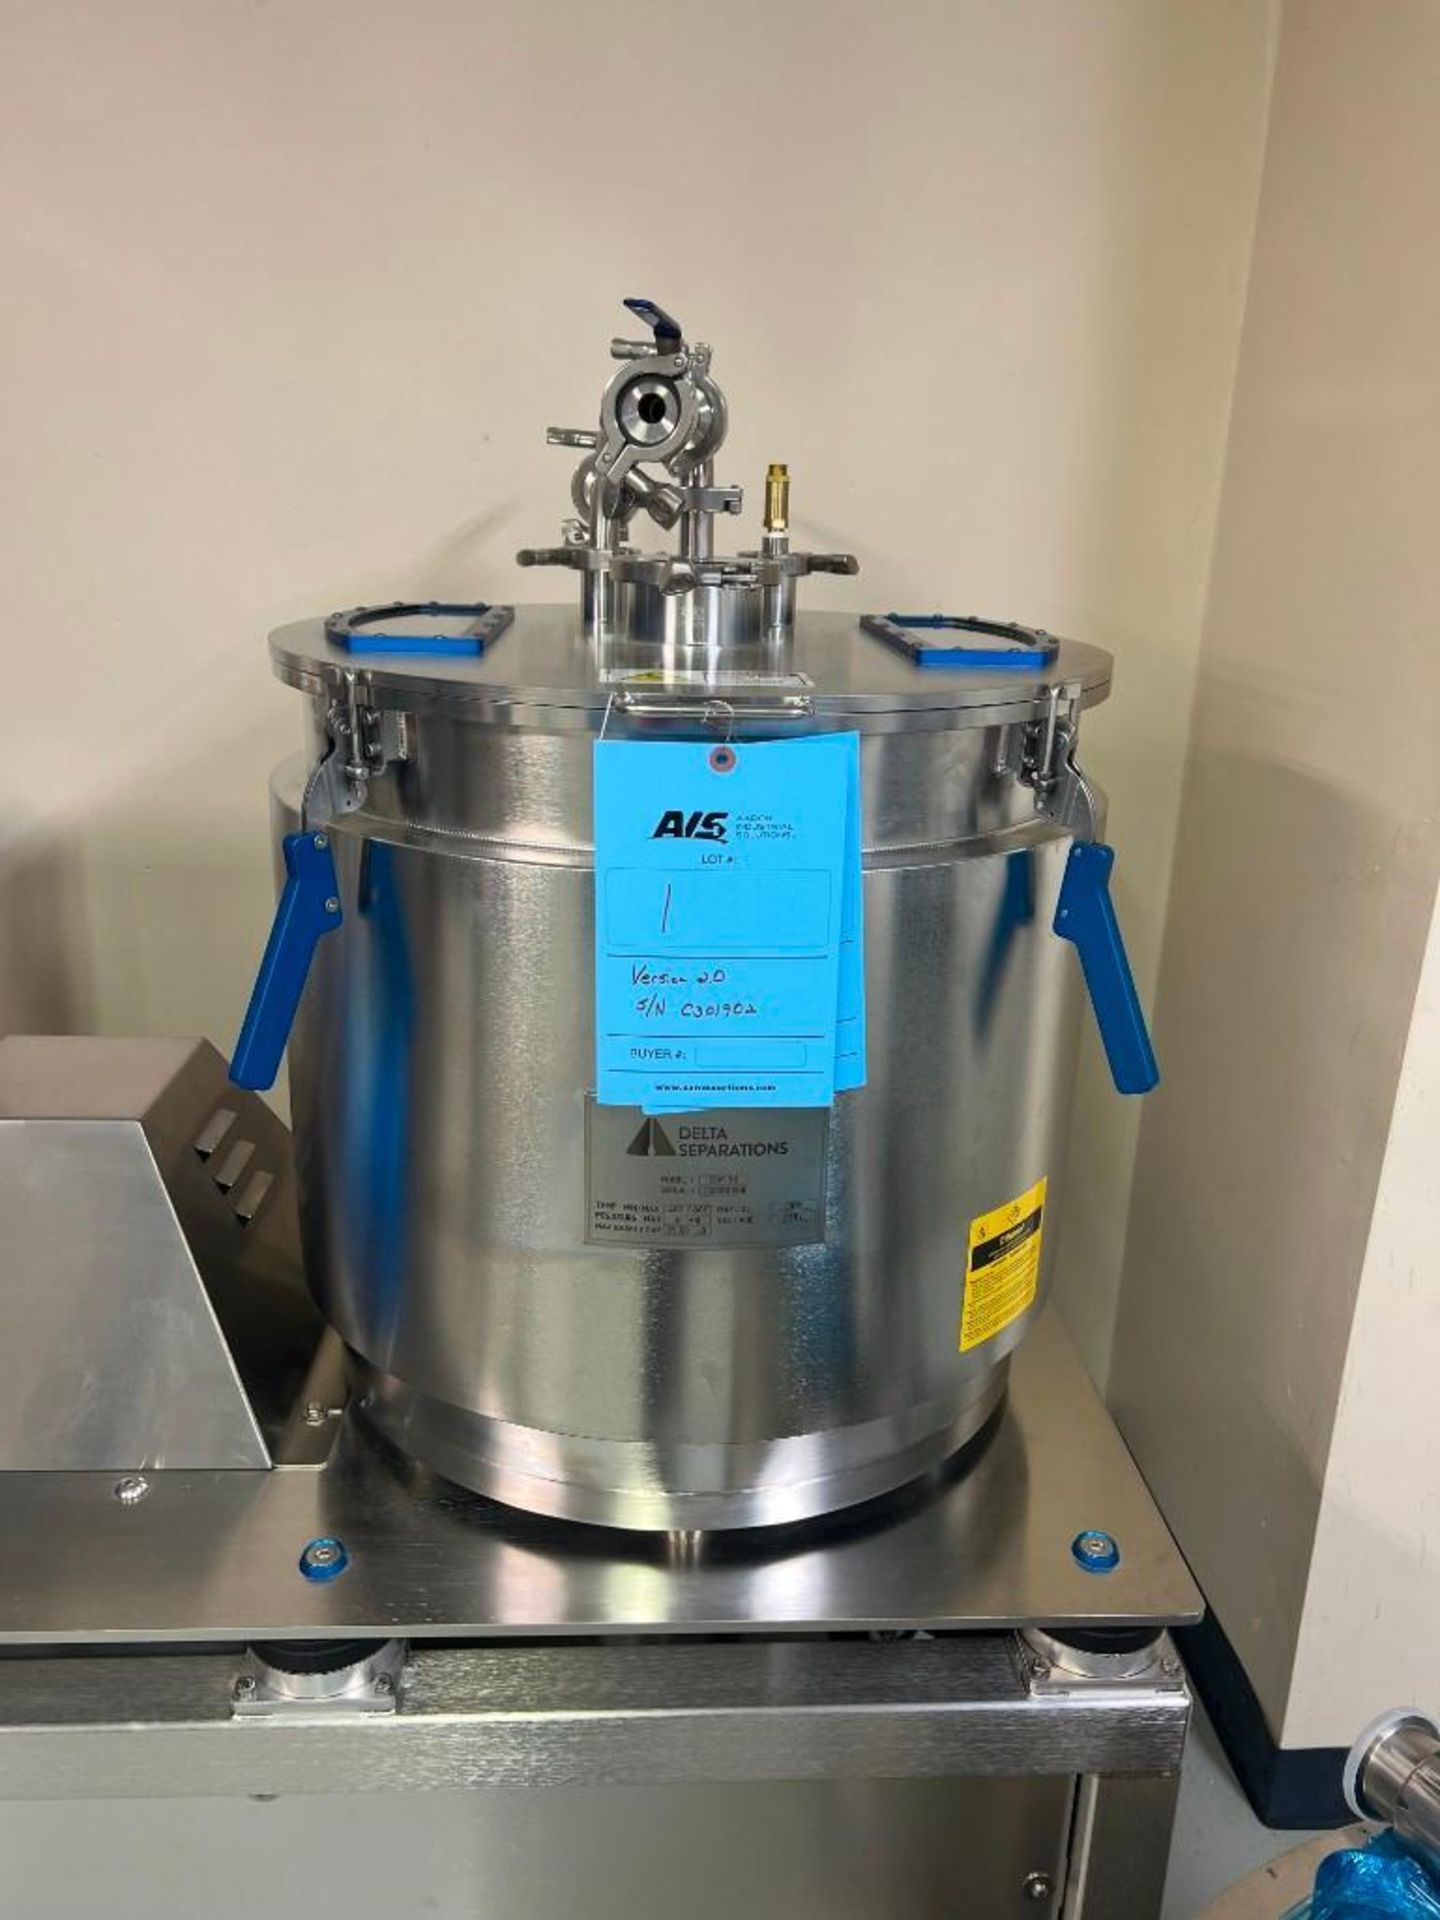 NEW Delta Separations Closed-Loop Alcohol Extraction System, Model Cup-30, Serial# C30190208. With c - Image 11 of 68